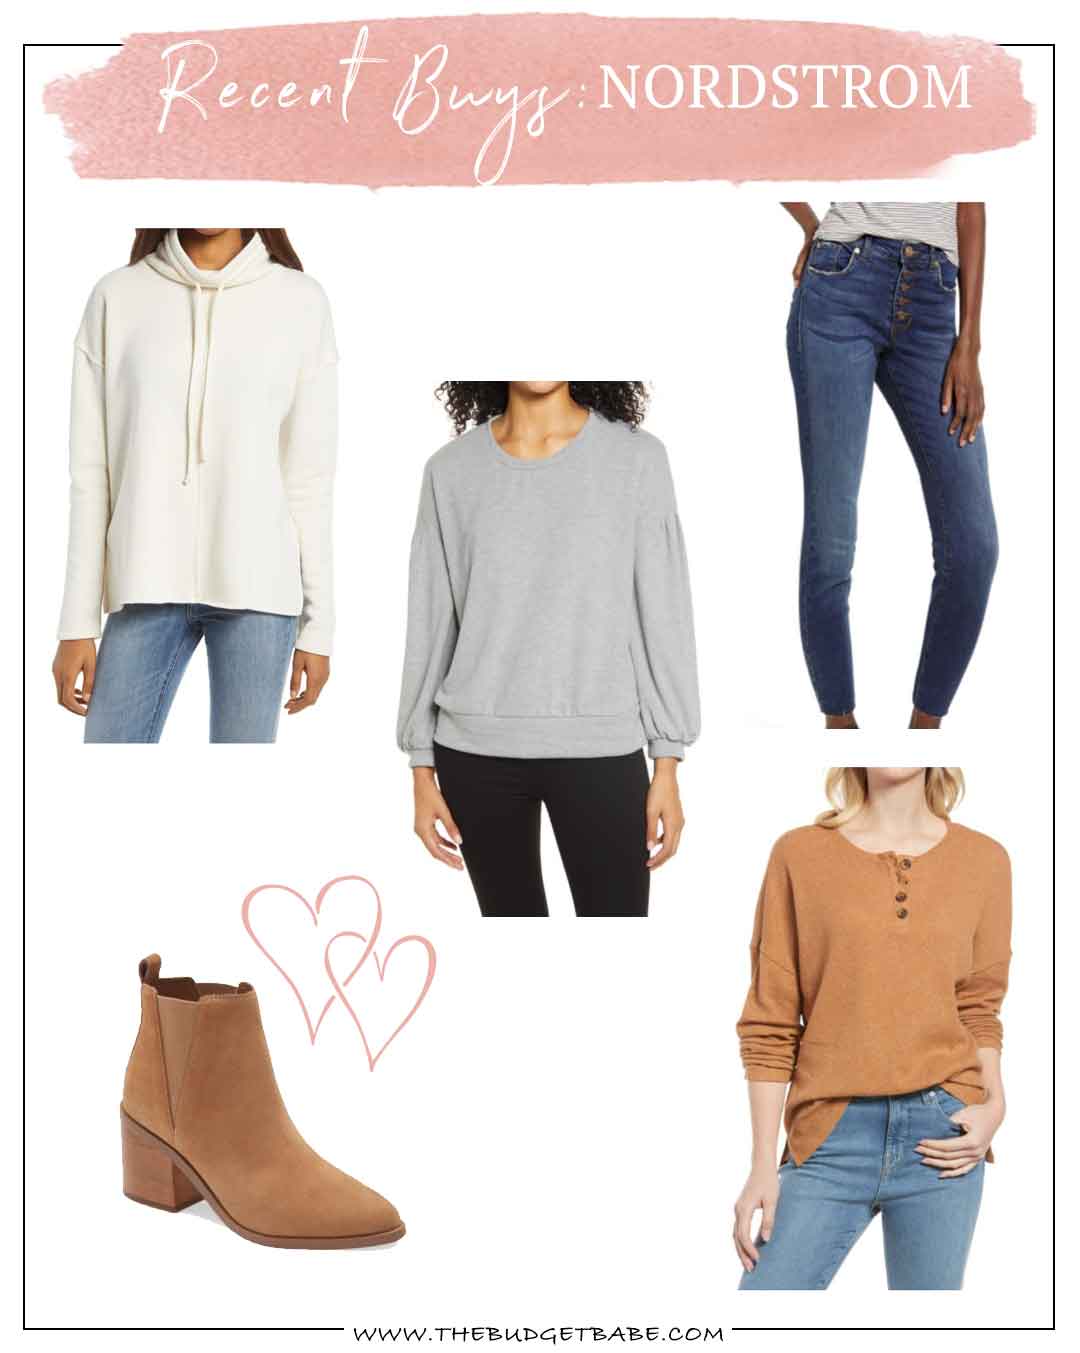 Nordstrom recent buys: Best neutral booties under $80, cute henley top for $39, cowlneck for $45 and high-waist button fly jeans for $59